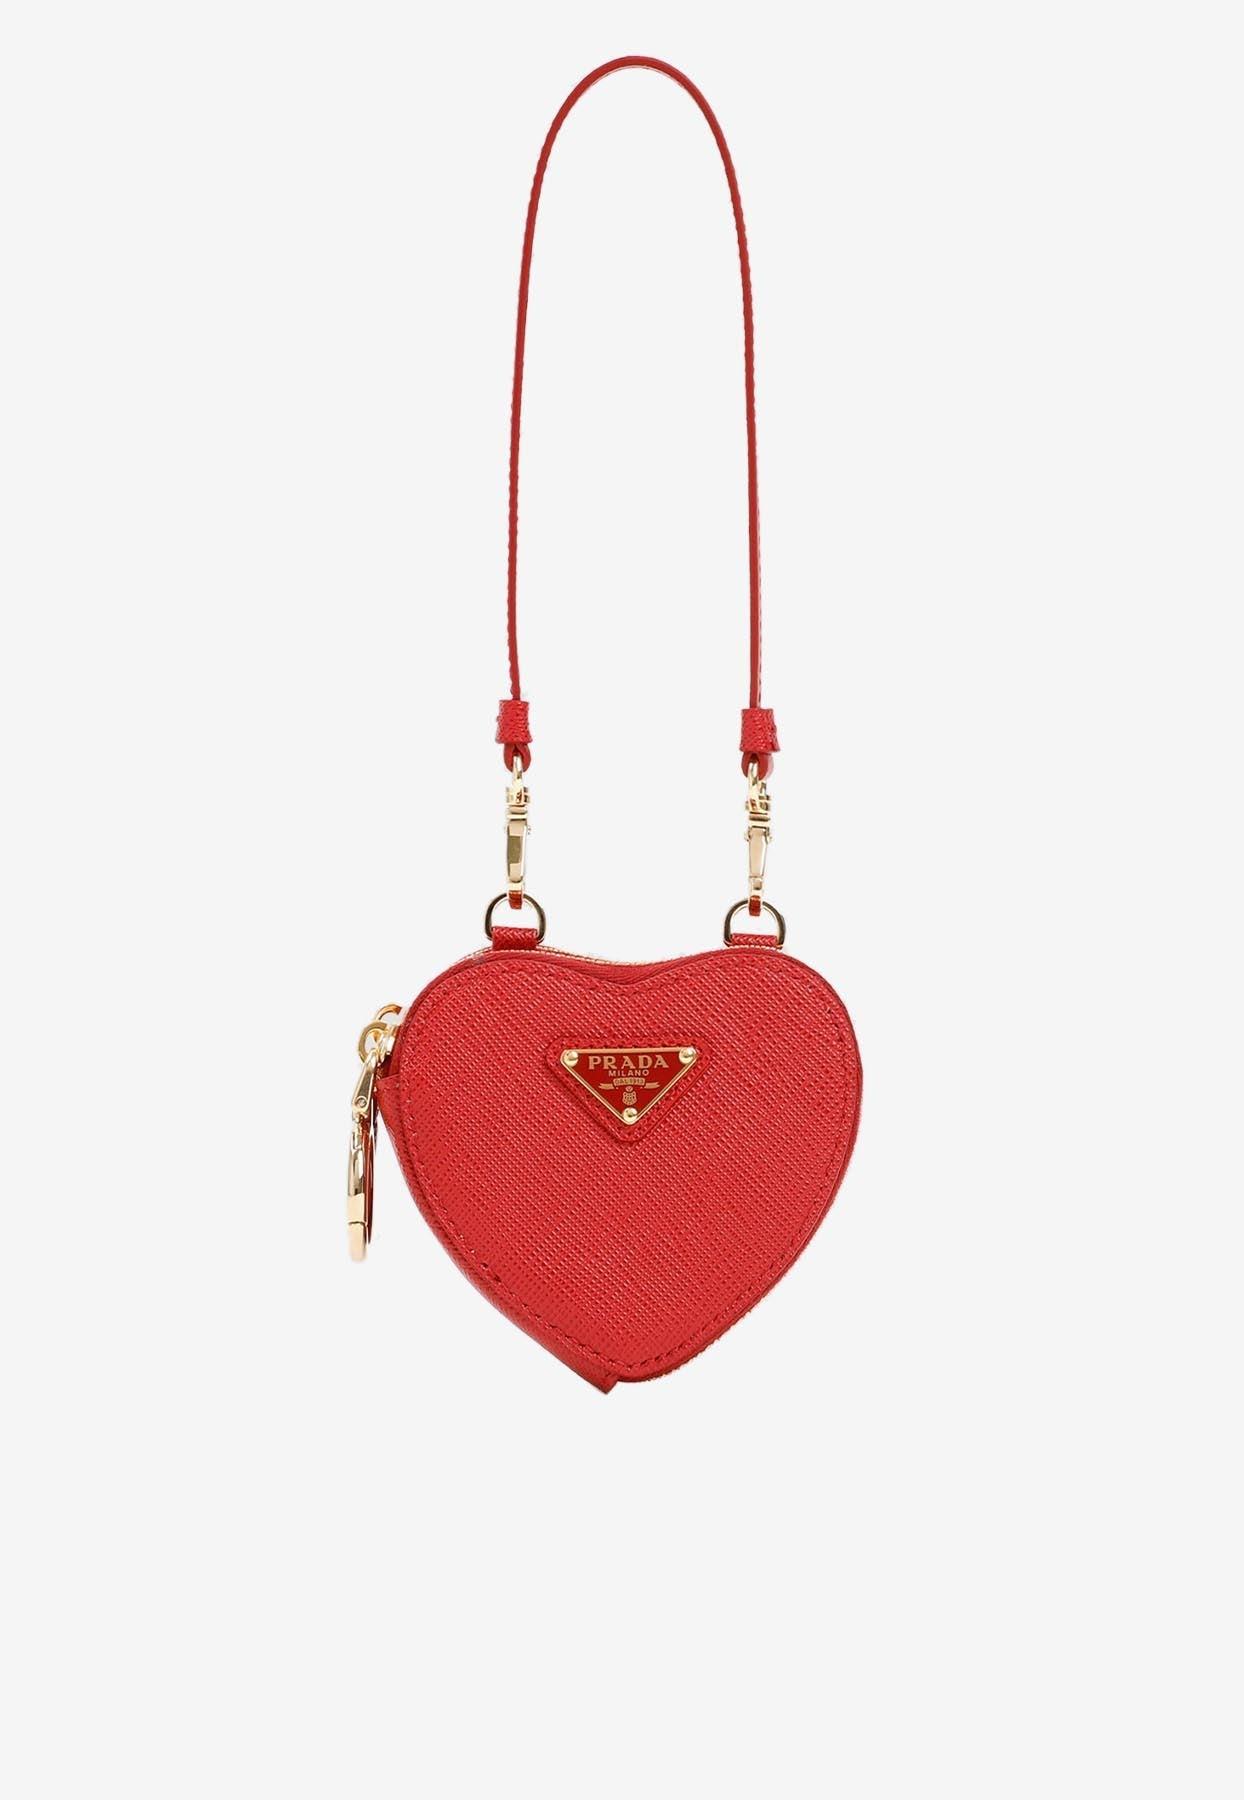 Prada Mini Saffiano Leather Heart-shaped Pouch in Red | Lyst